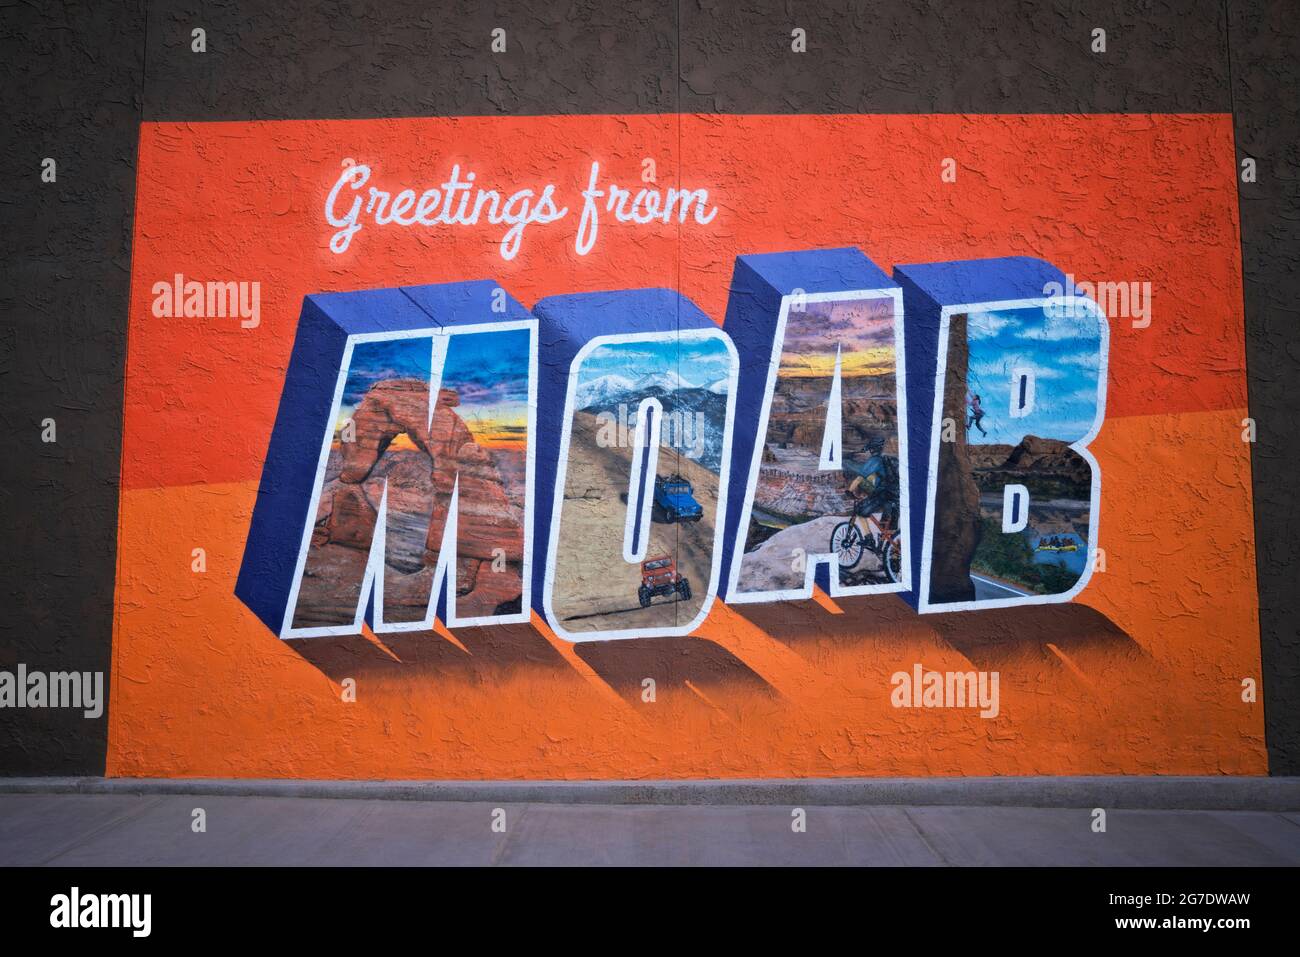 Large building size mural in Moab shows some of the many outdoor activites that draw visitors from around the world to this area of Utah. Stock Photo